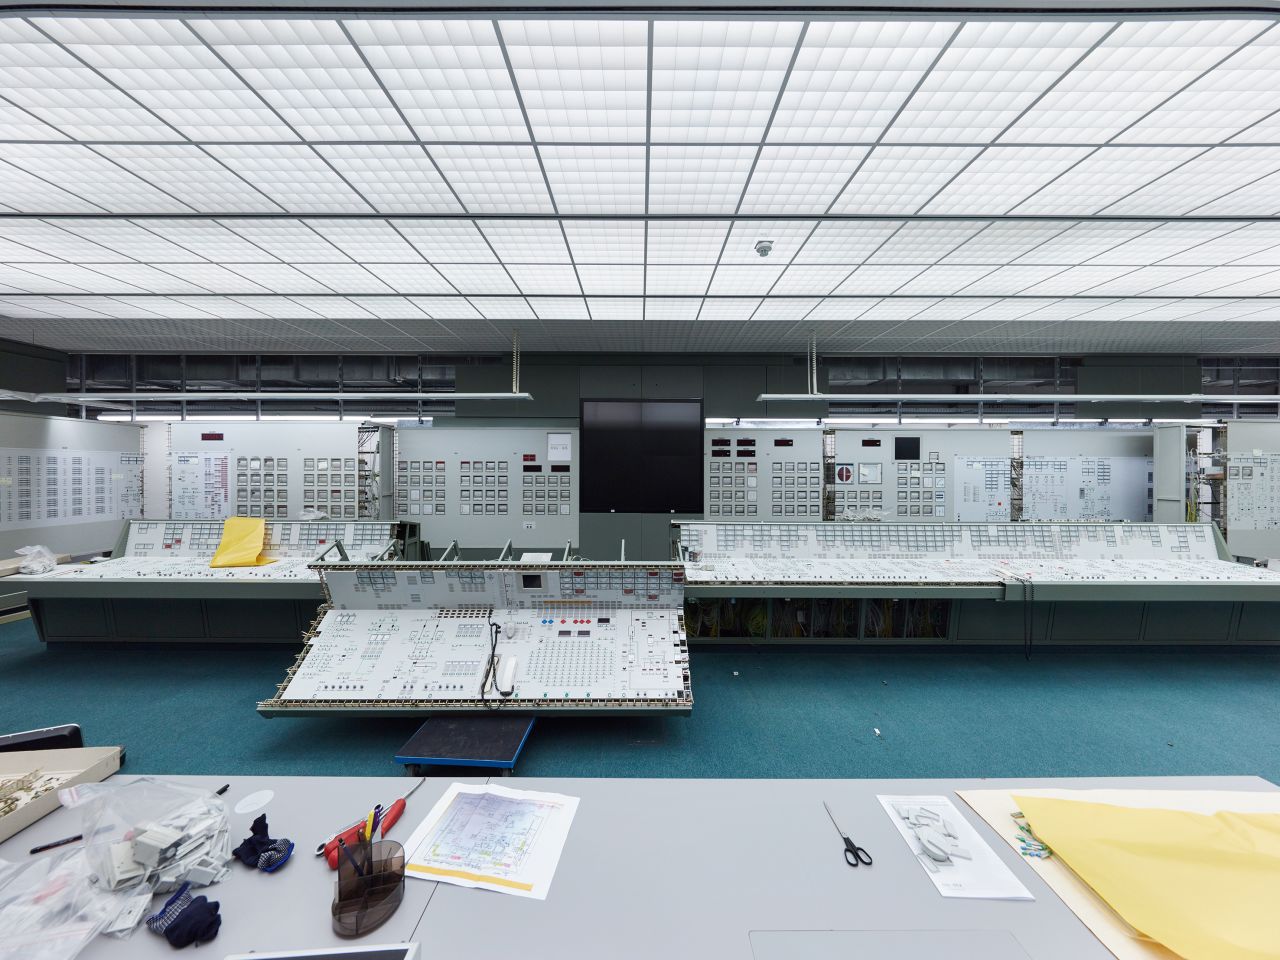 As well as power plants, Ludewig also photographed training facilities, such as this simulation control center in Essen.